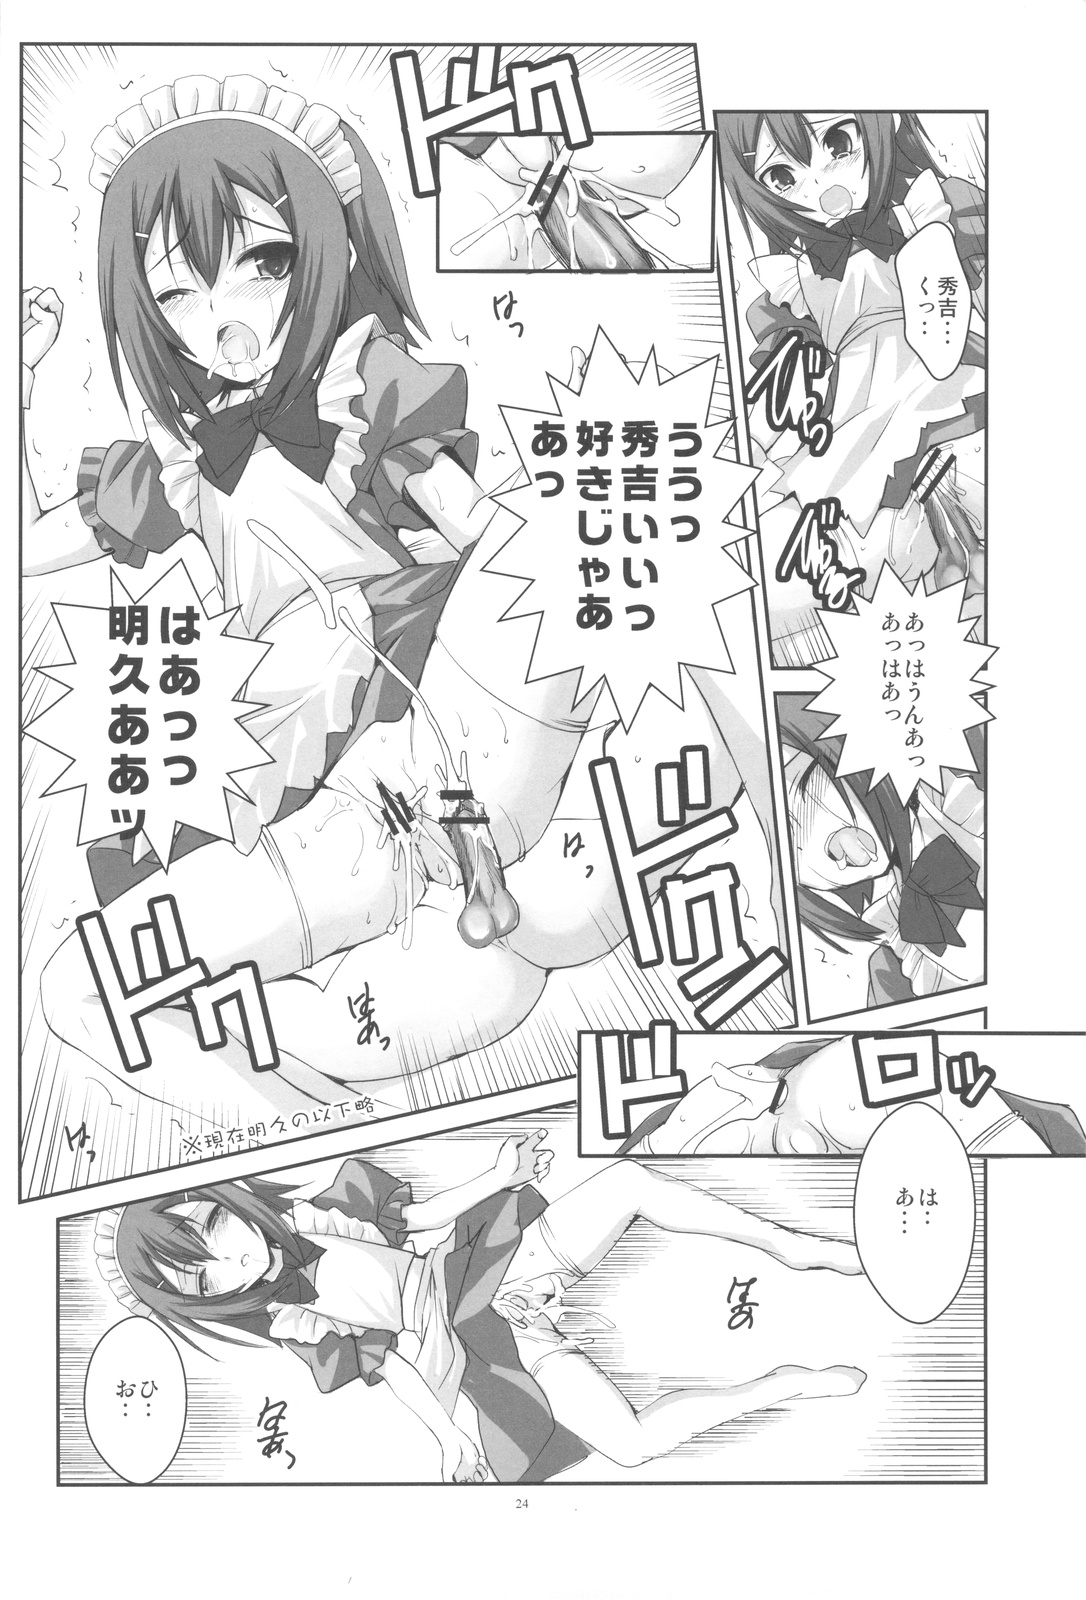 (COMIC1☆4) [R-WORKS] LOVE IS GAME OVER (Baka to Test to Shoukanjuu) page 24 full